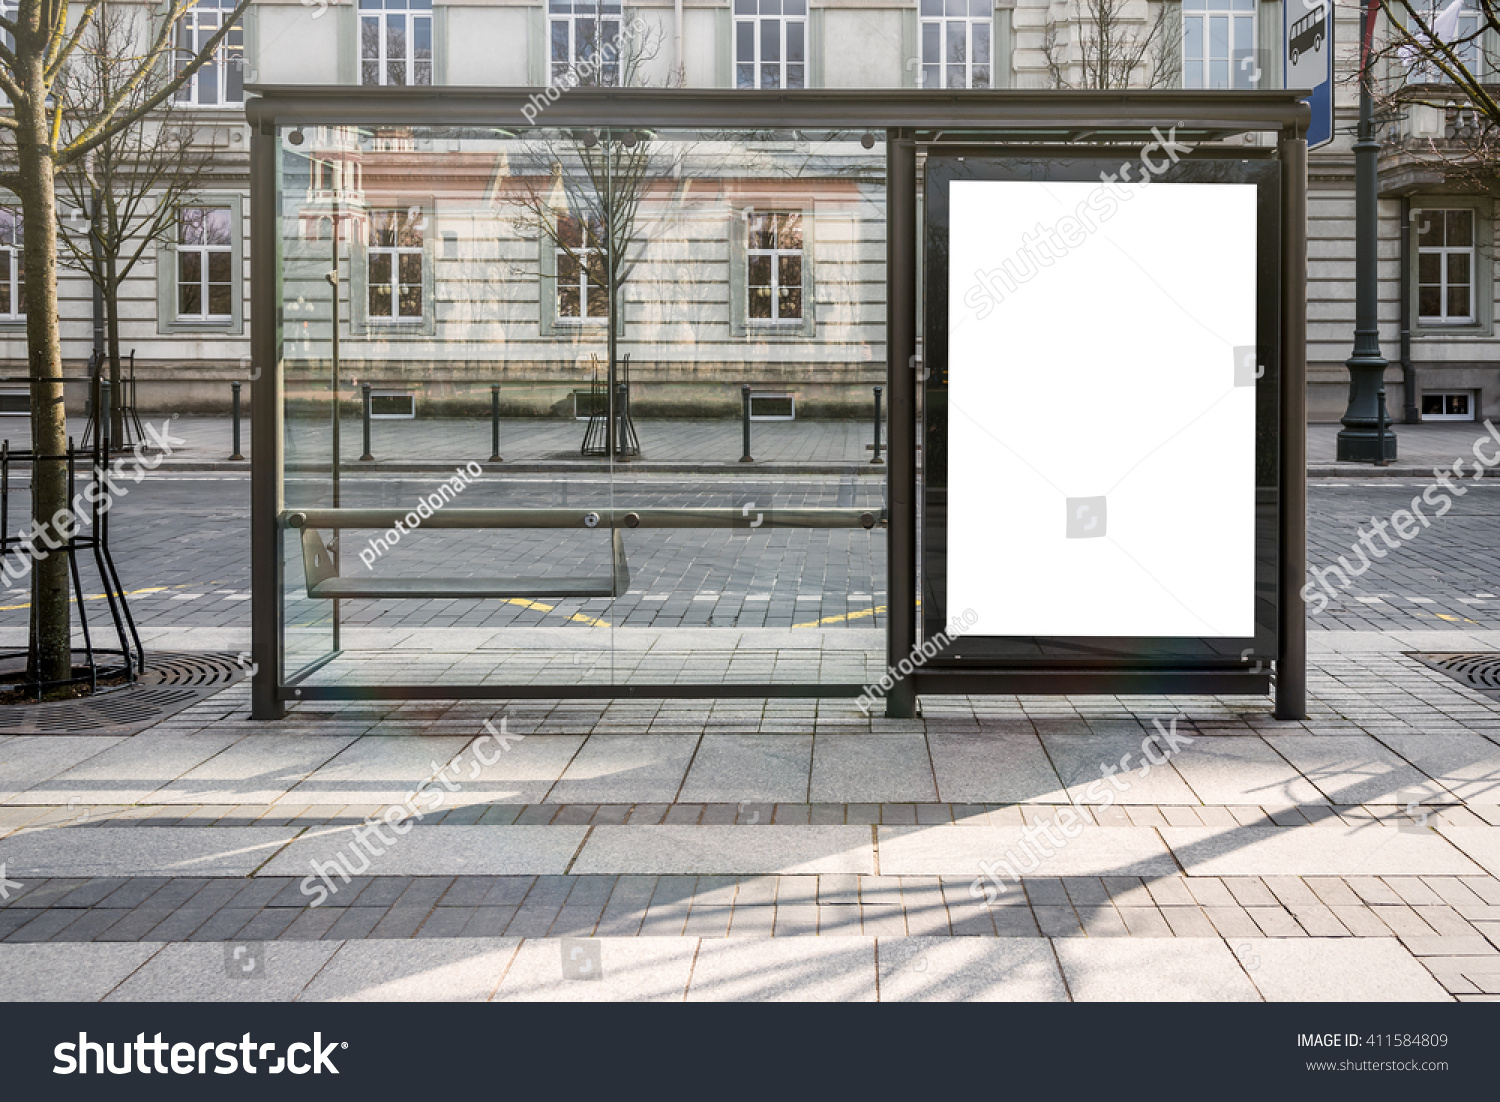 Blank white mockup of bus stop vertical billboard in front of empty street background #411584809